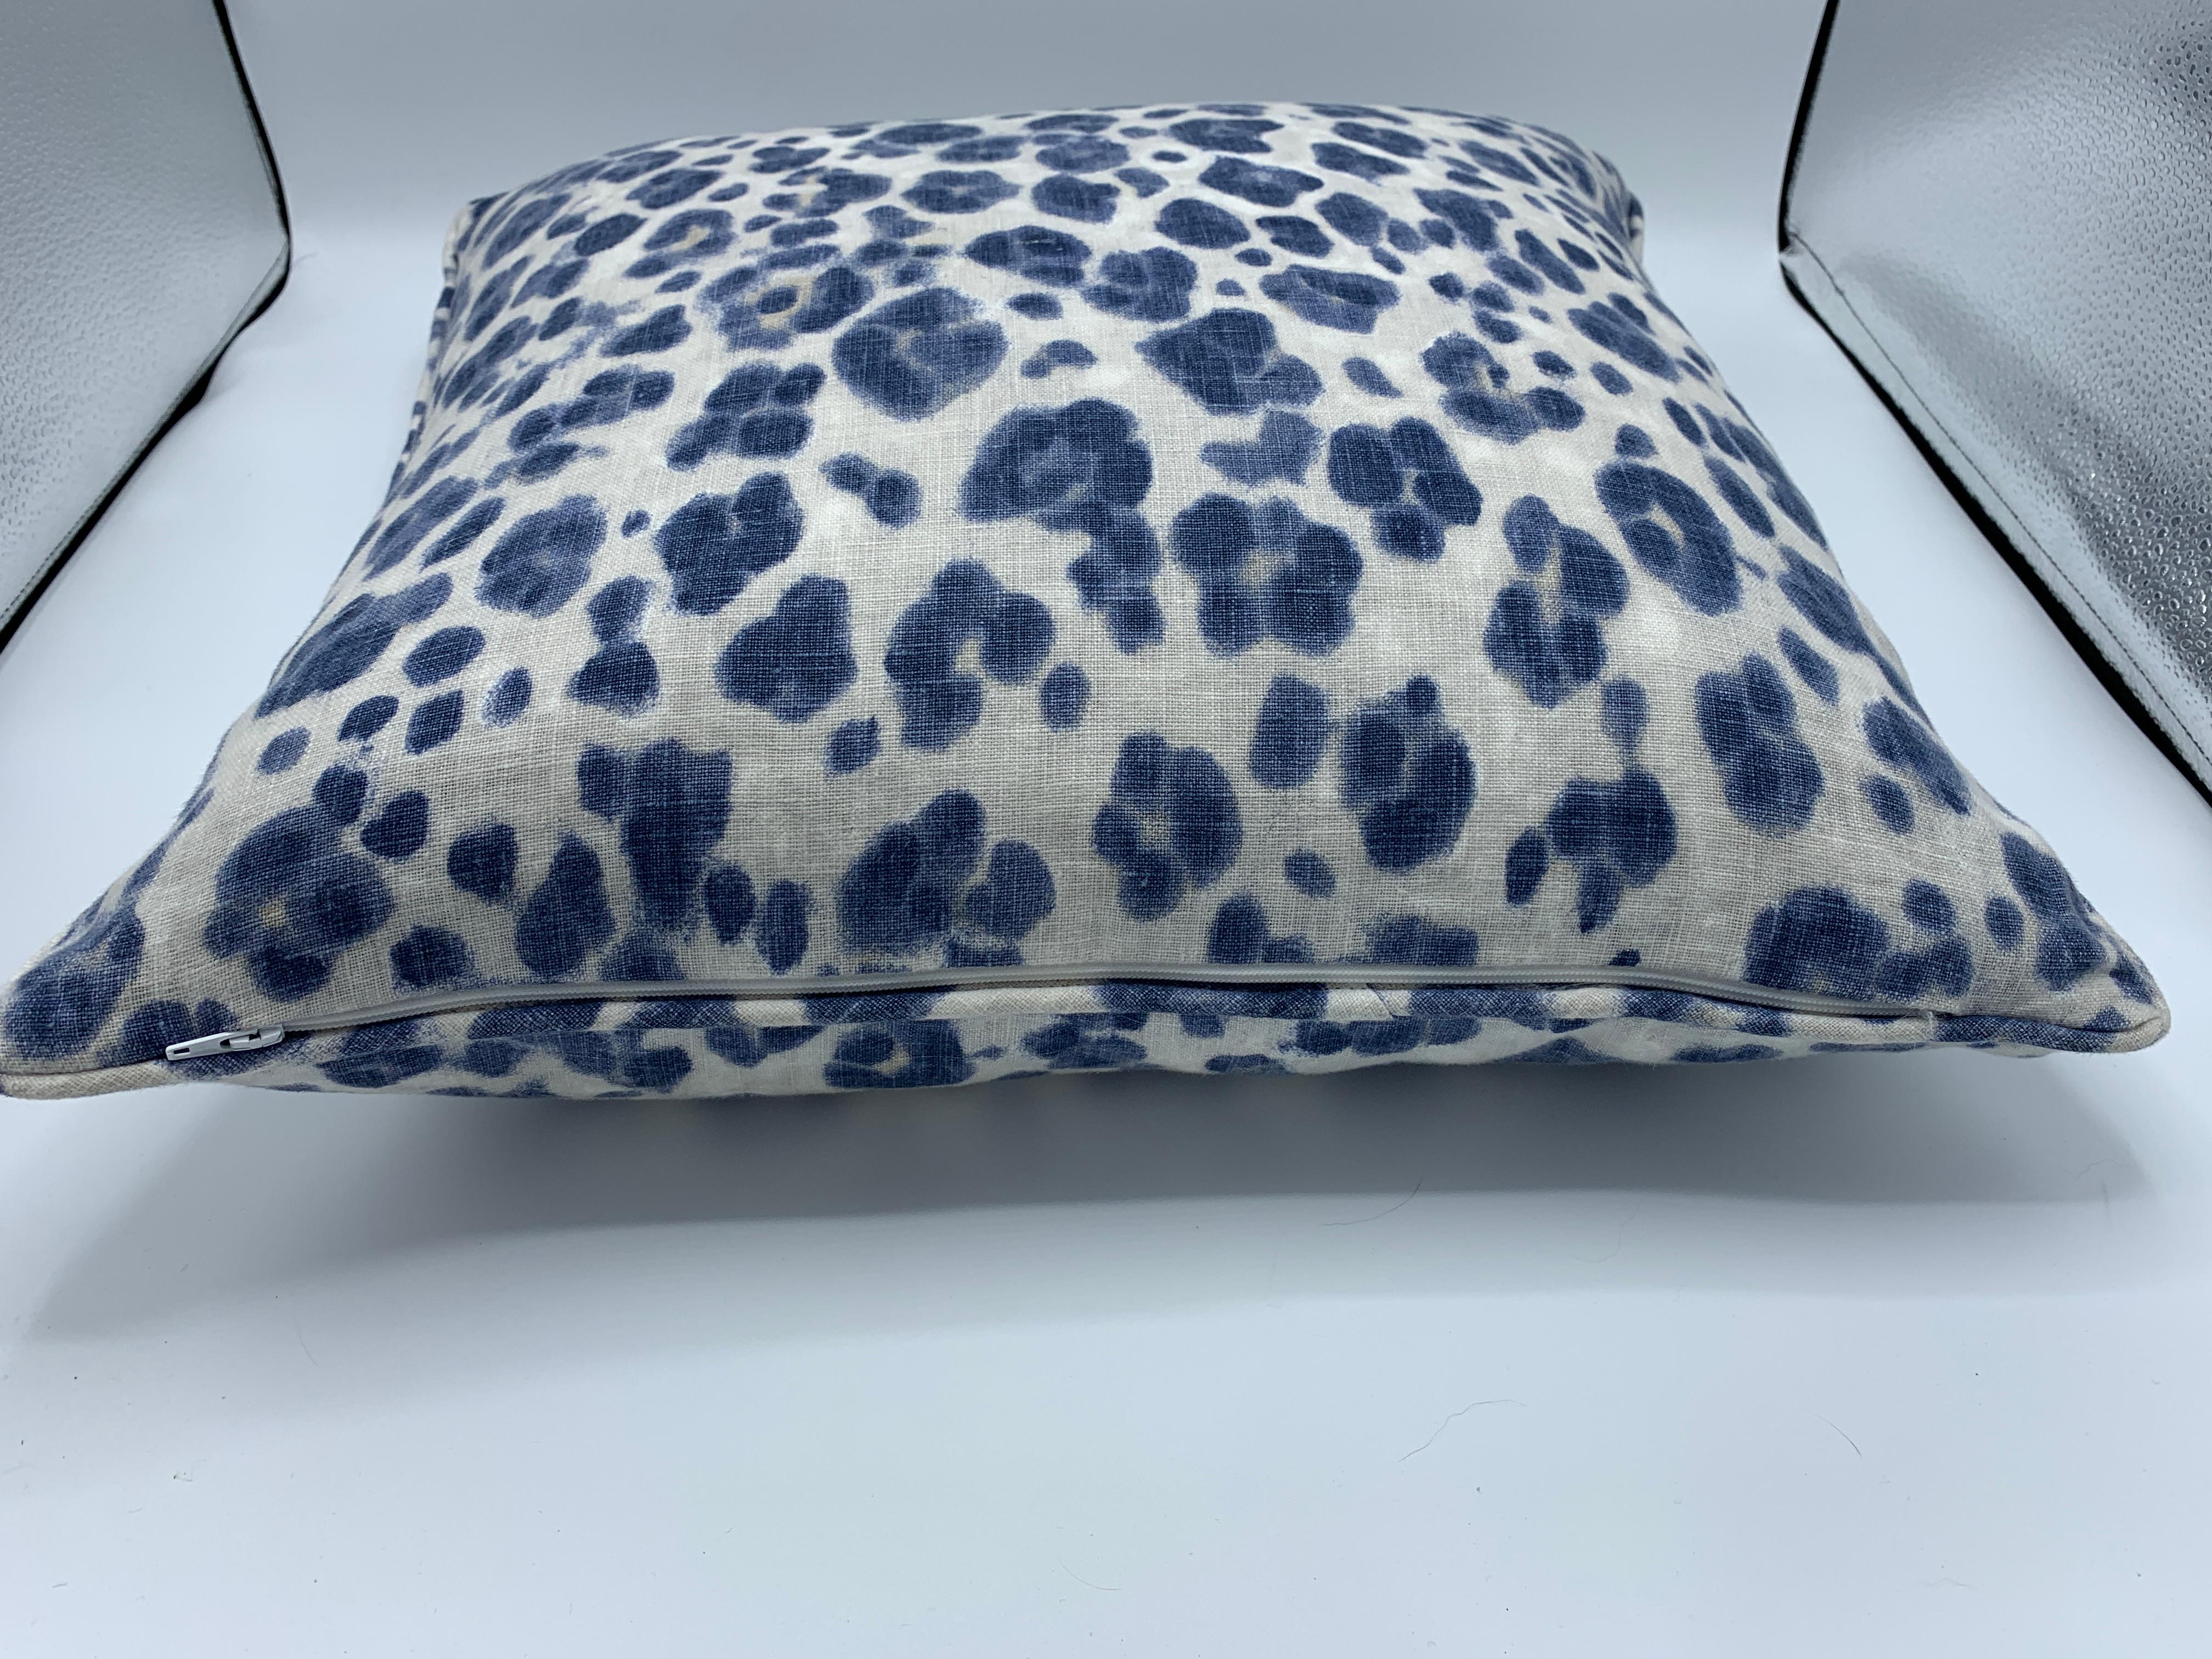 Contemporary Thibaut 'Panthera' Blue and White Panther Motif on Linen Pillows, Pair